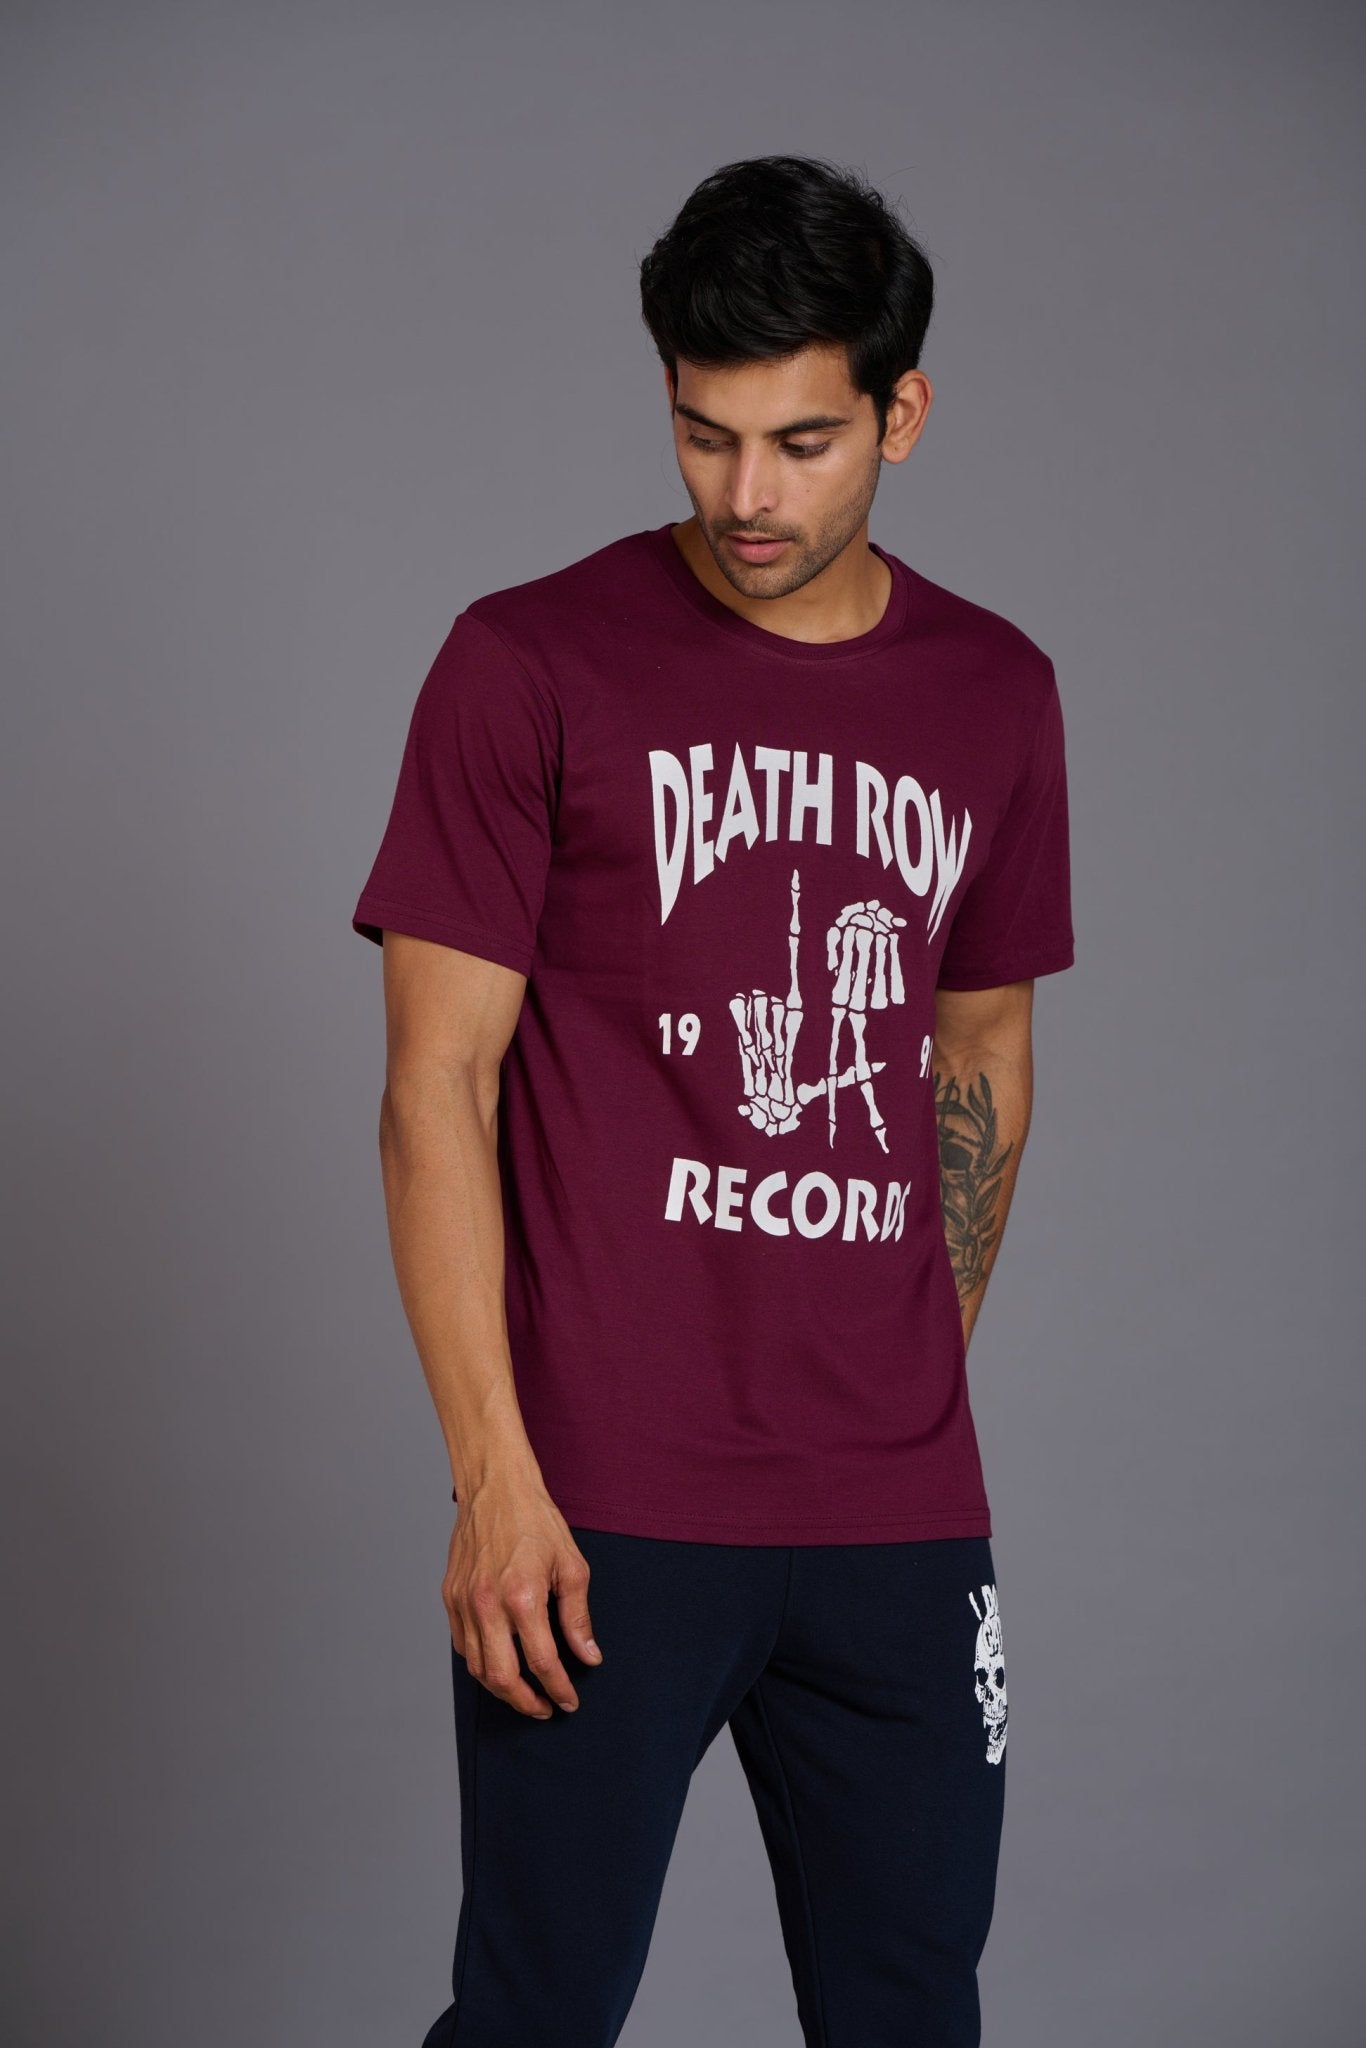 Death Row Records Printed Maroon T-Shirt for Men - Go Devil